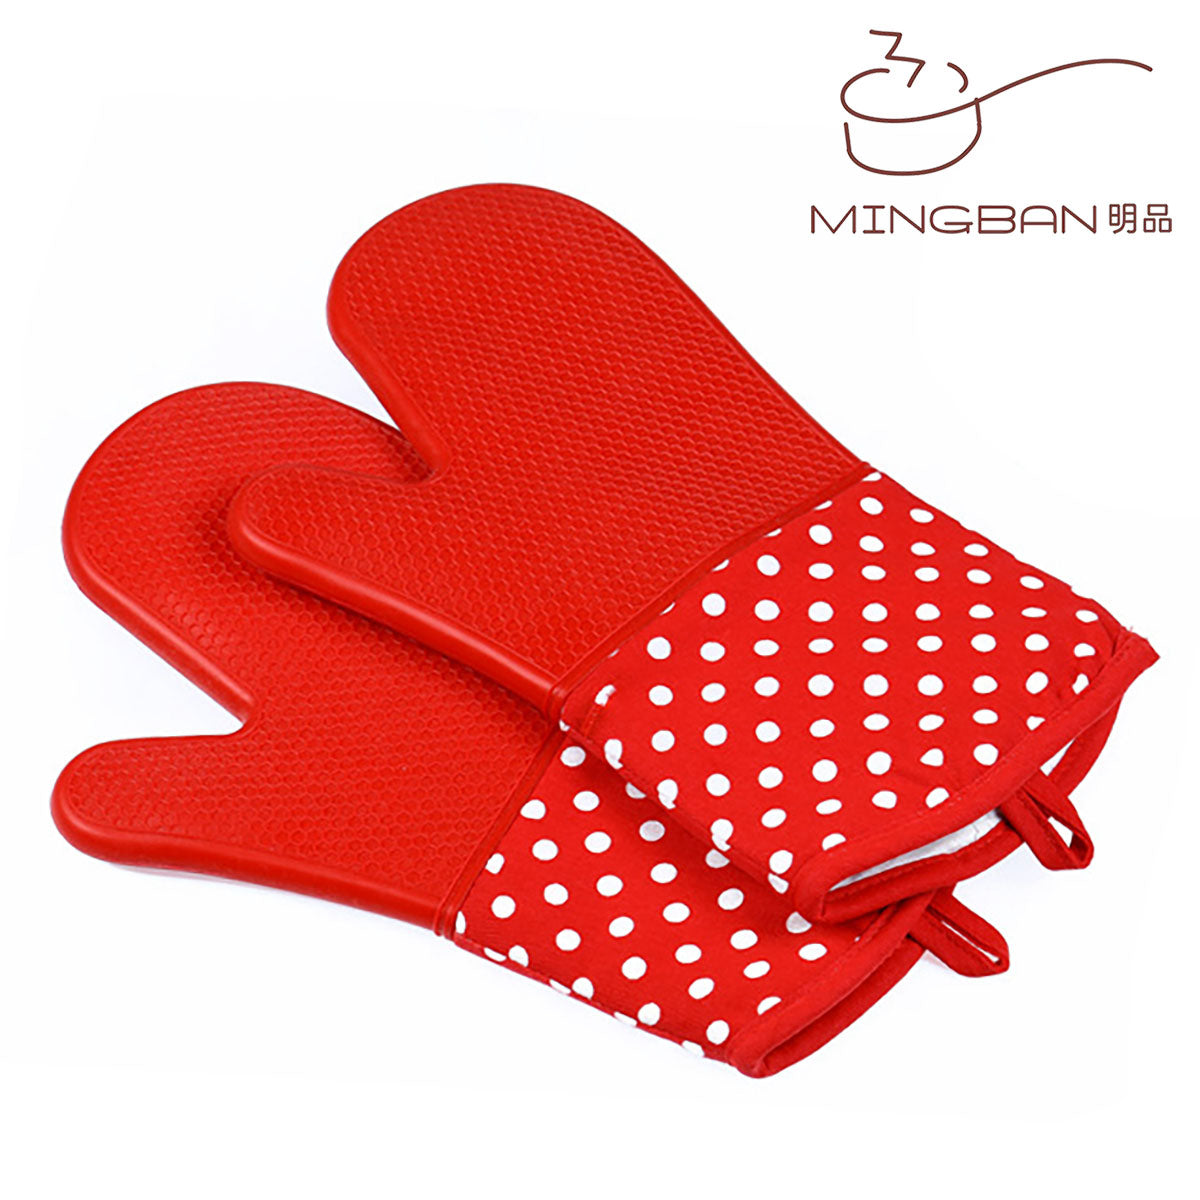 Heat Resistant Silicone Oven Mitt - Red Polka Dot